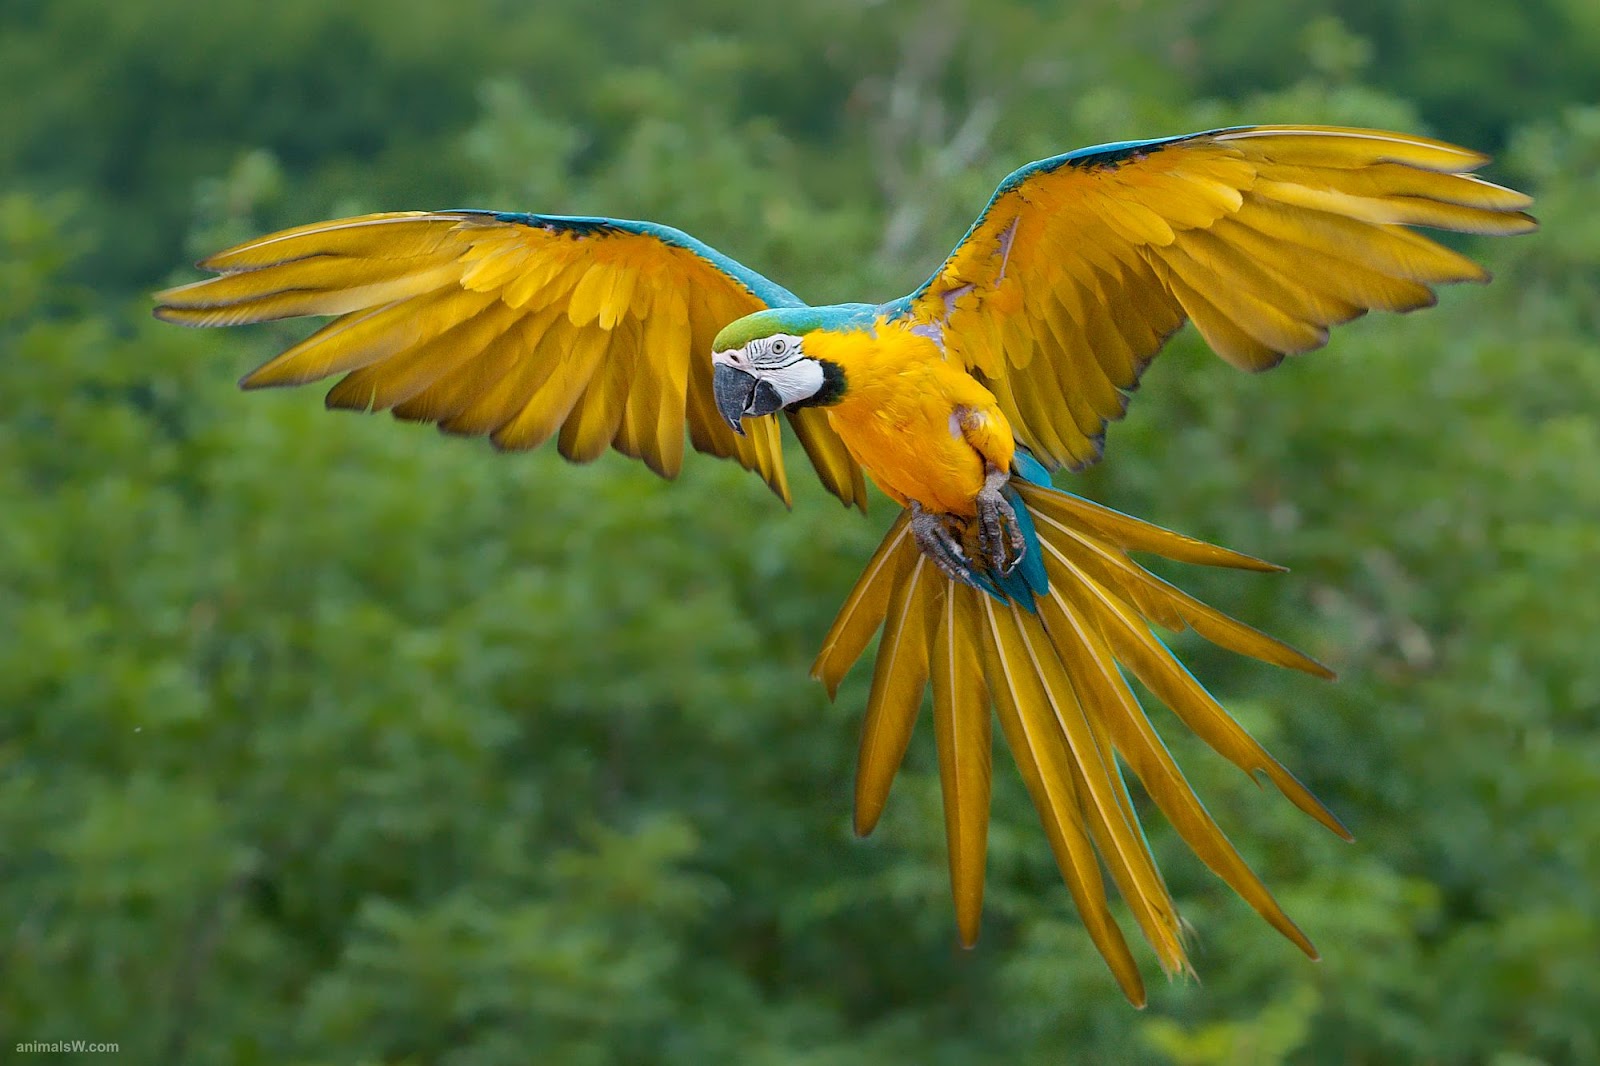 Macaw Parrots as Pets | Fun Animals Wiki, Videos, Pictures, Stories